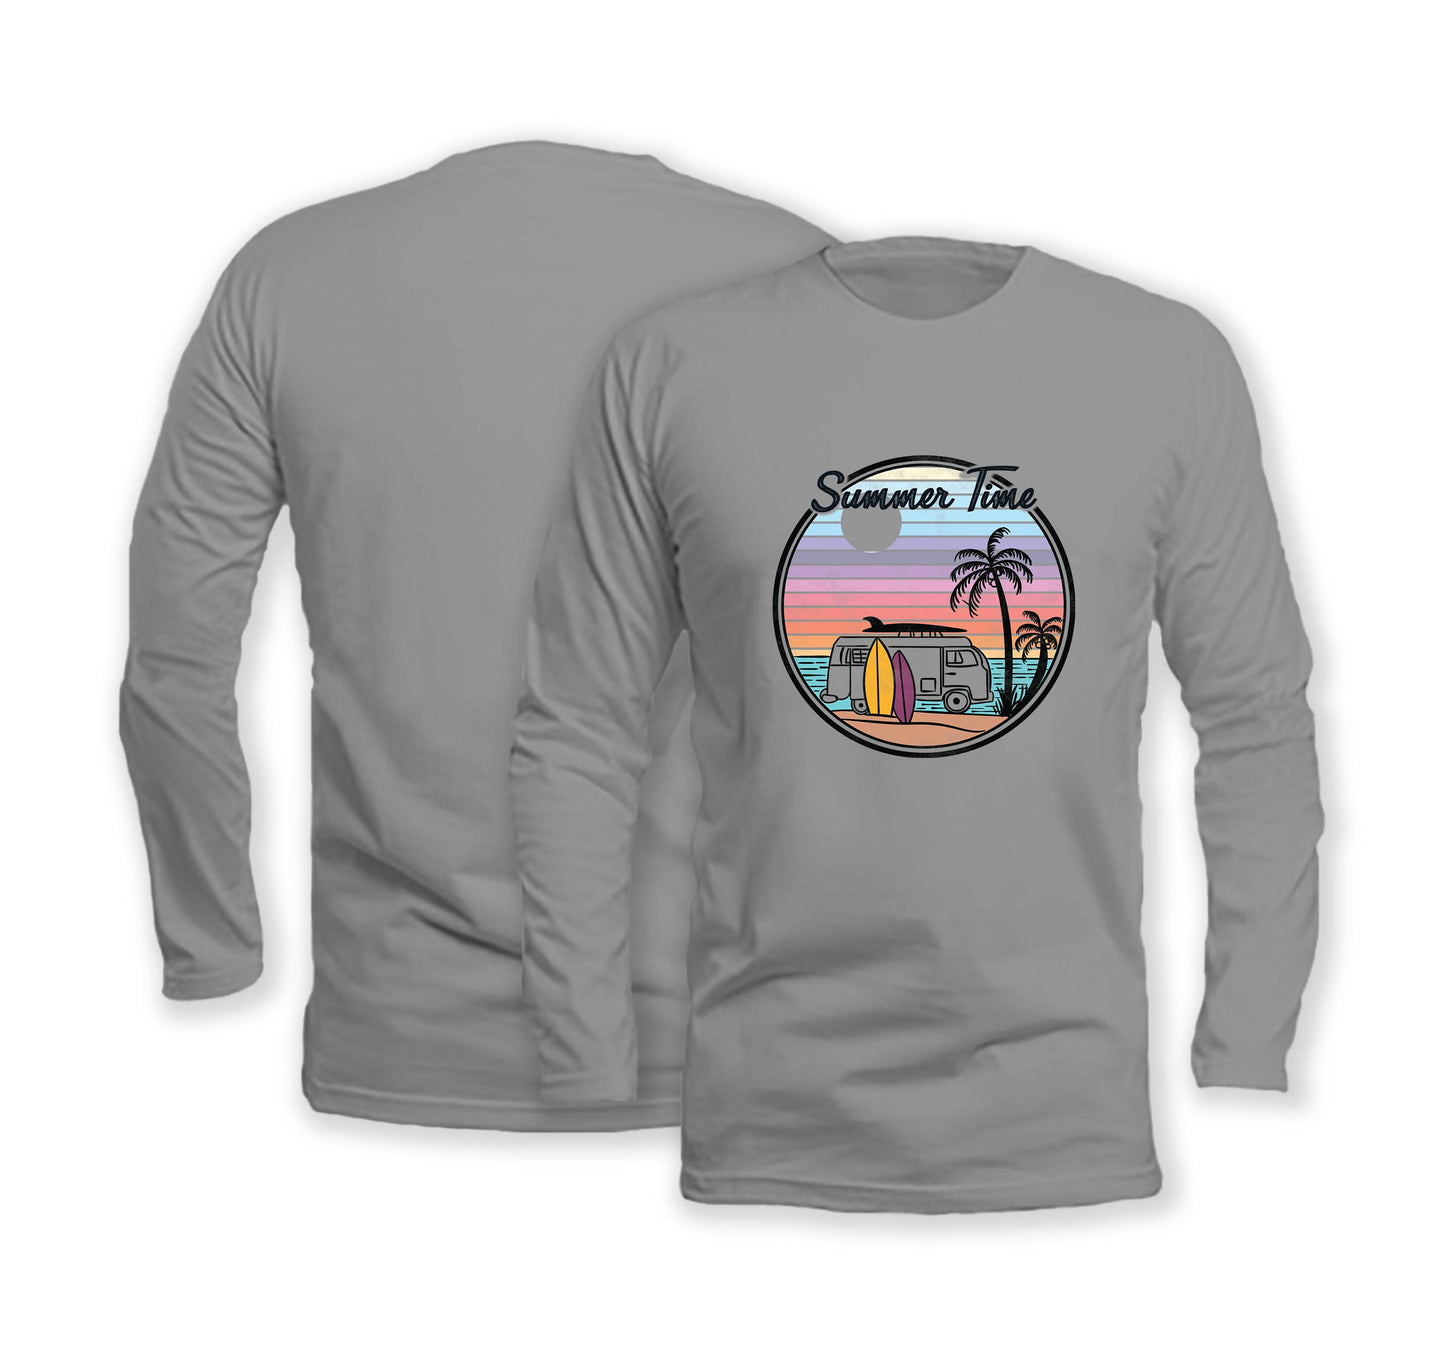 Summer Time - Long Sleeve Organic Cotton T-Shirt - Front Print - One Choice Apparel